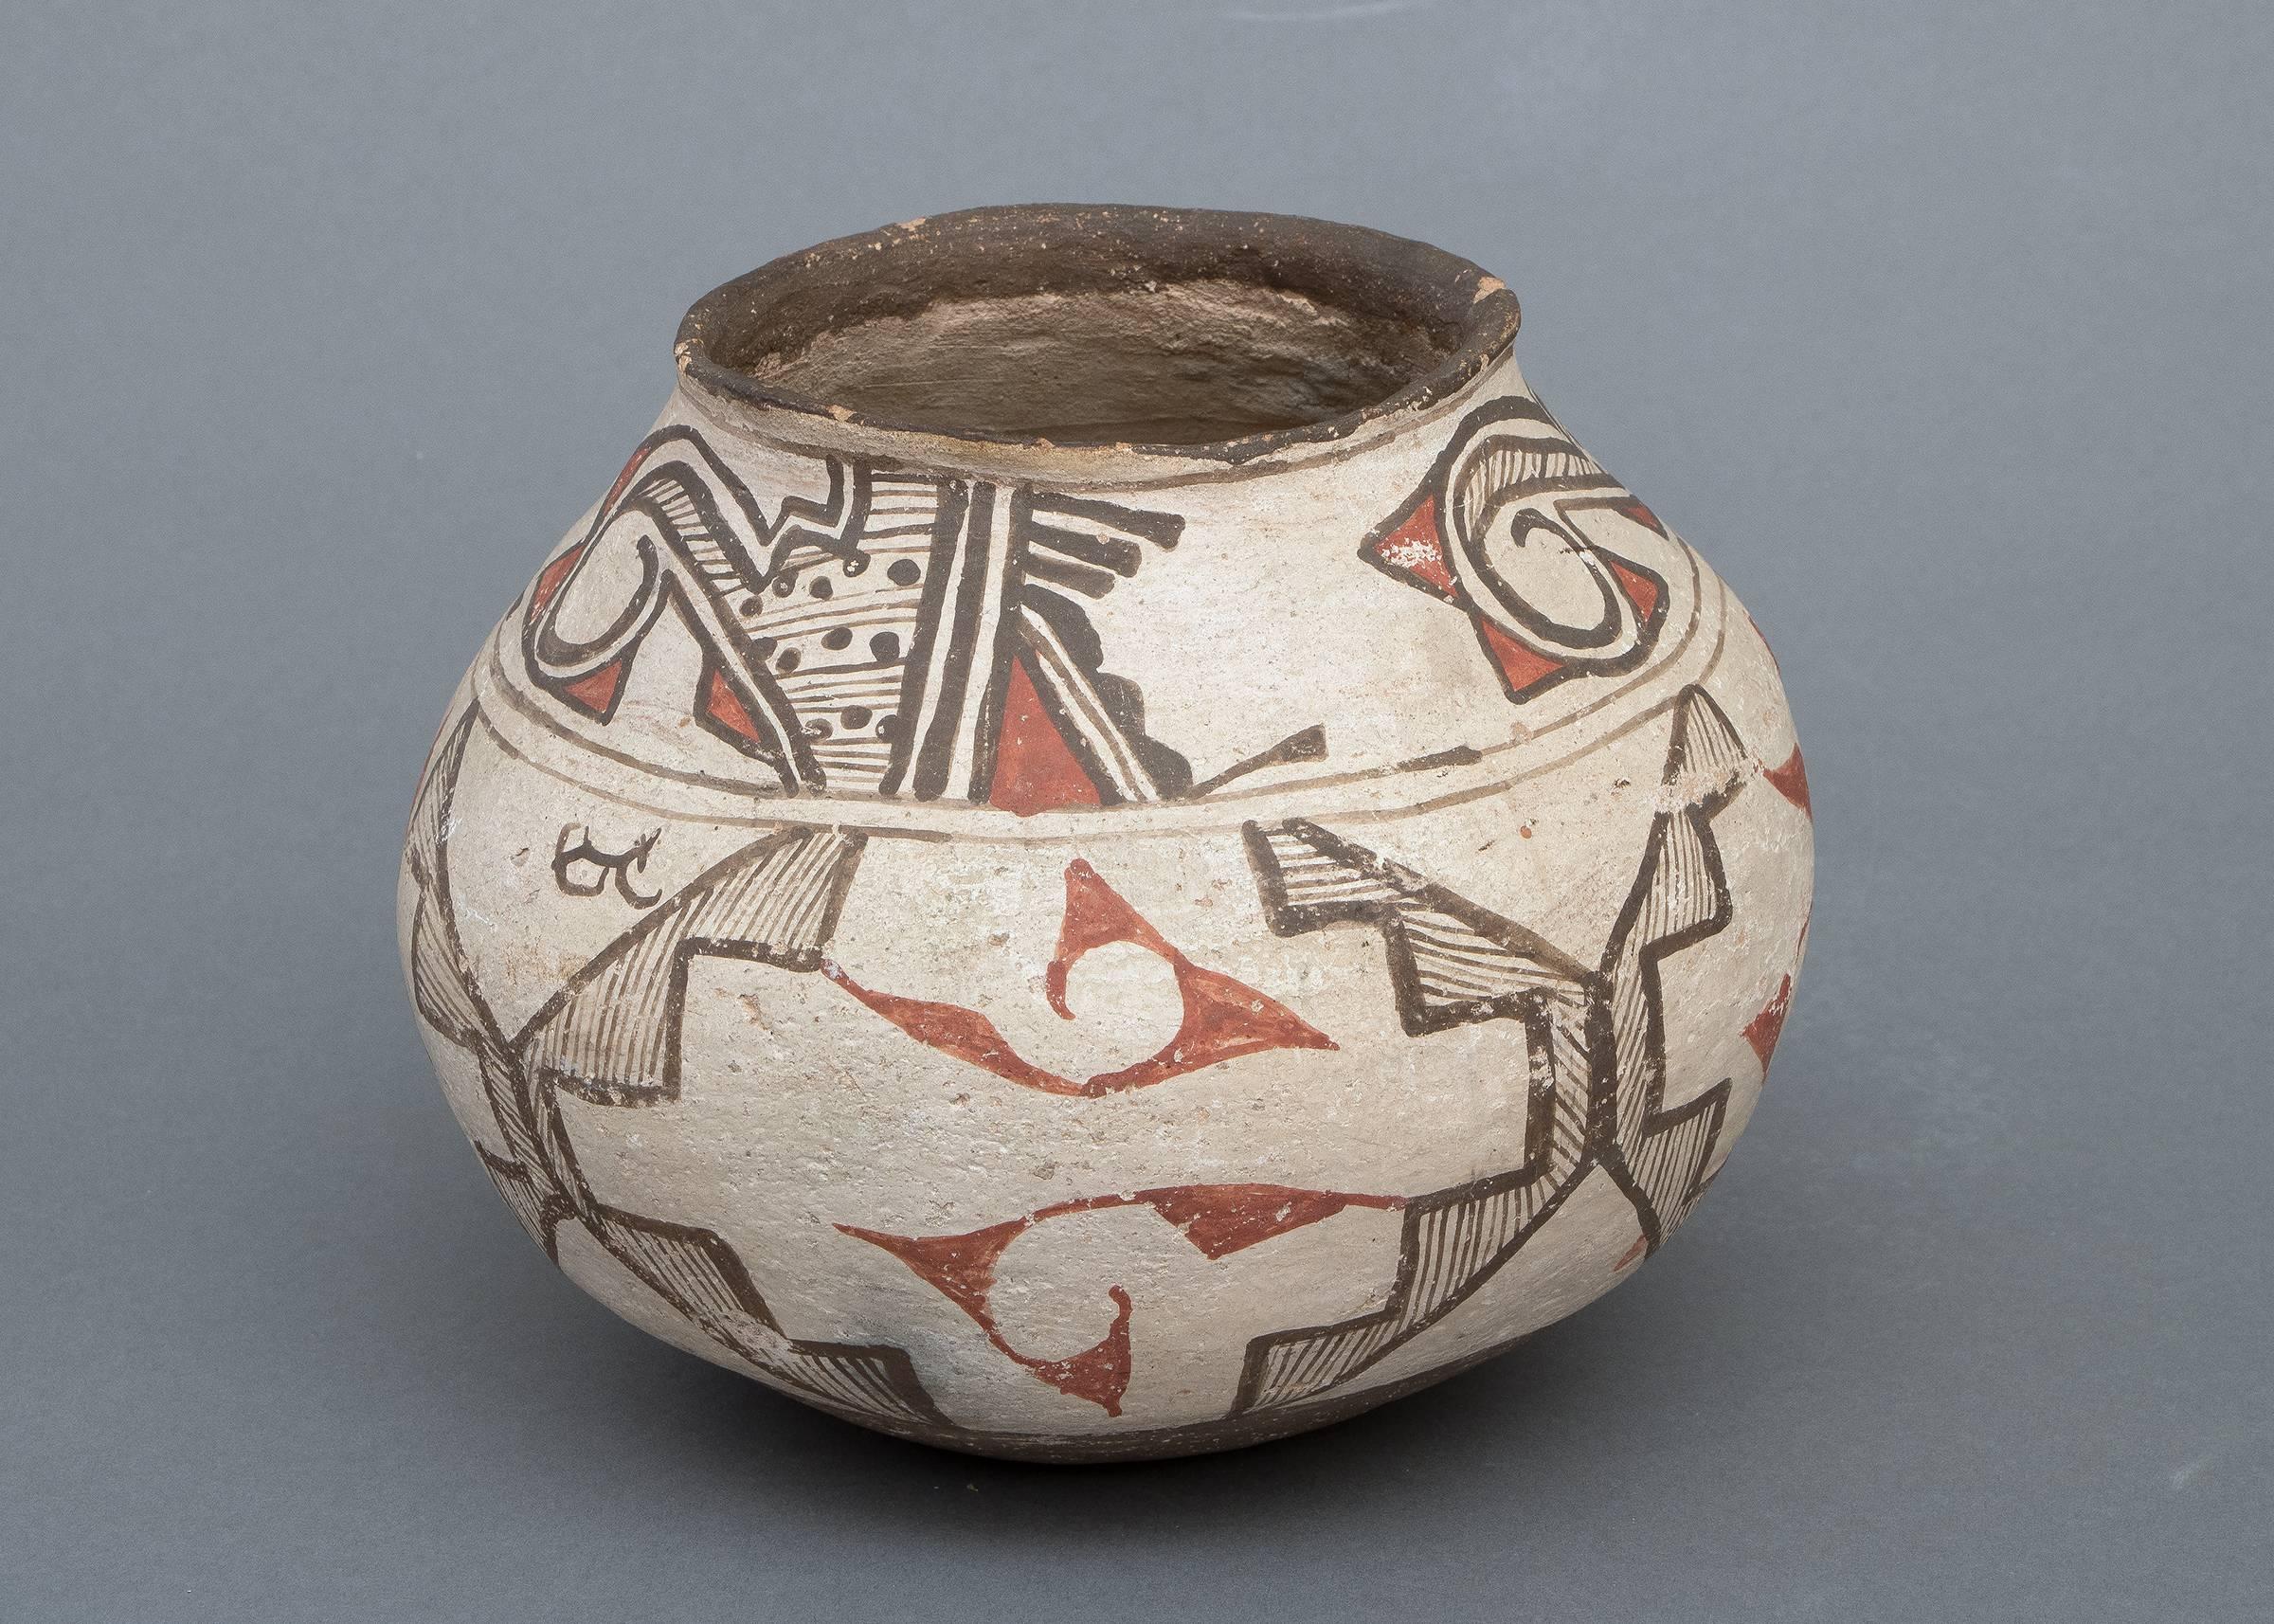 A polychrome jar painted in slip glazes with Classic Zuni geometric design elements in dark-brown and red on a white field.

Messenger Service is available to the Denver & Boulder metro areas as well as other select destinations within Colorado. 